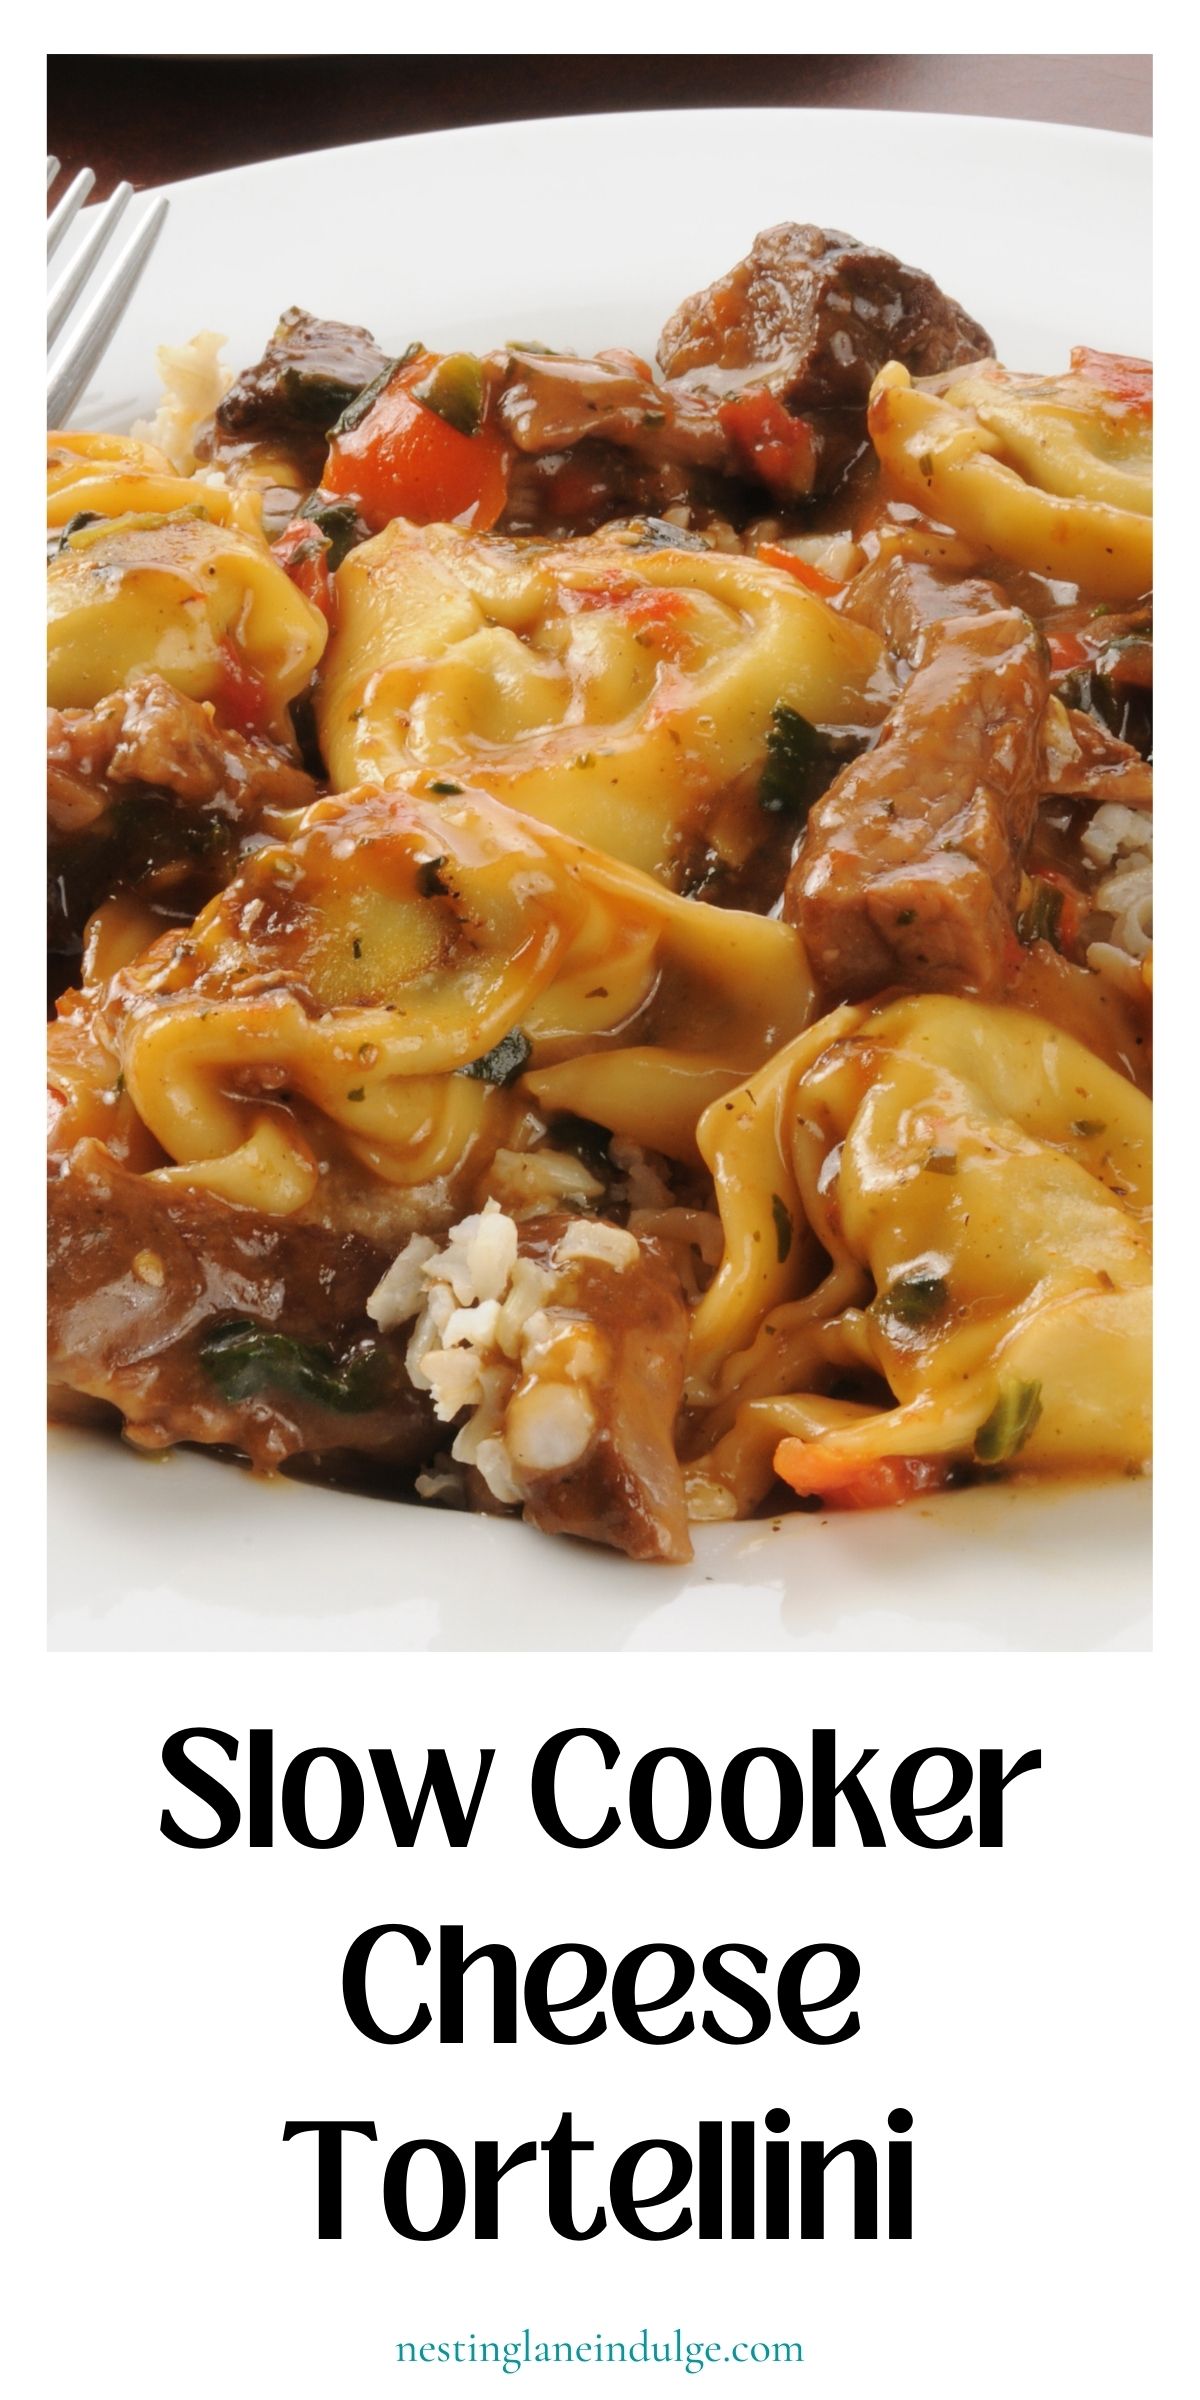 Slow Cooker Cheese Tortellini Graphic.